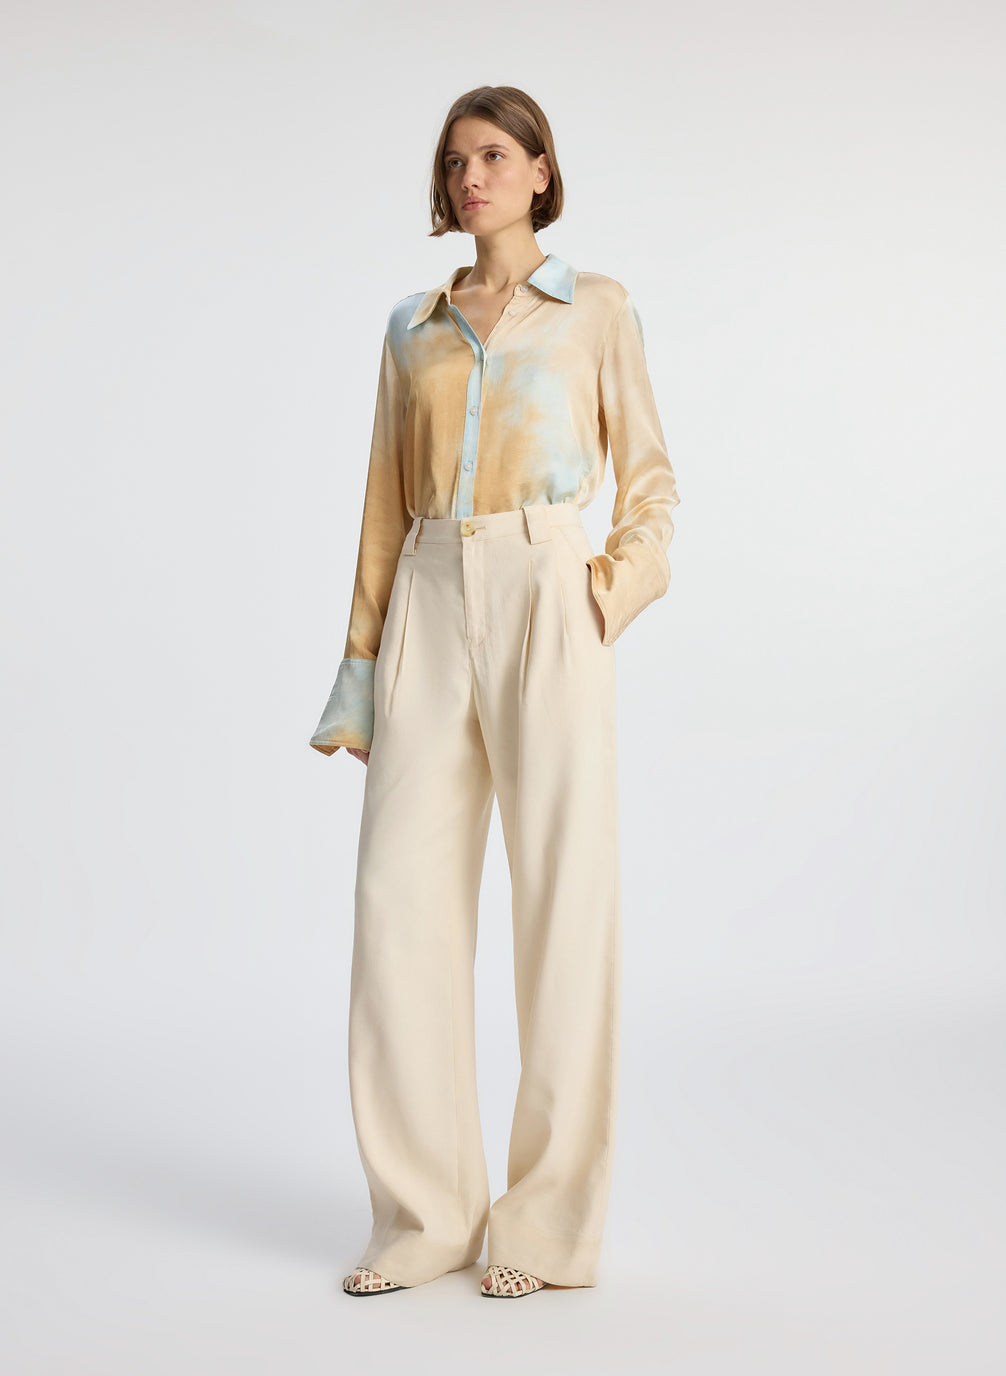 side view of woman wearing long sleeve collared multicolored shirt and beige pants